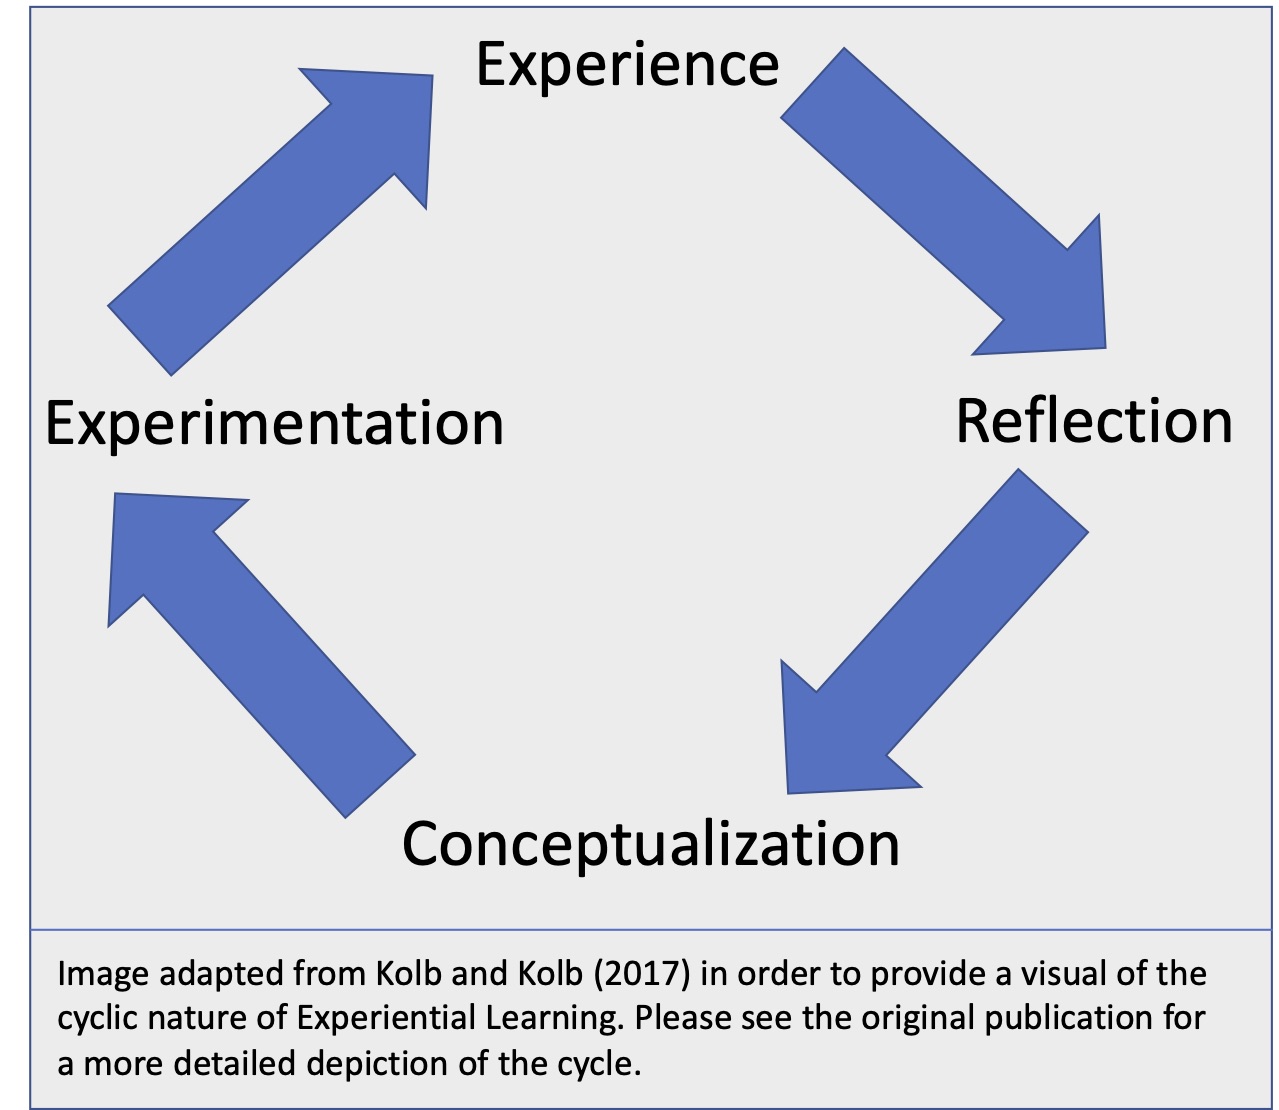 This figure shows an simplified depiction of Kolb's Experiential Learning Cycle: Experience, Reflection, Conceptualization and Experimentation. 